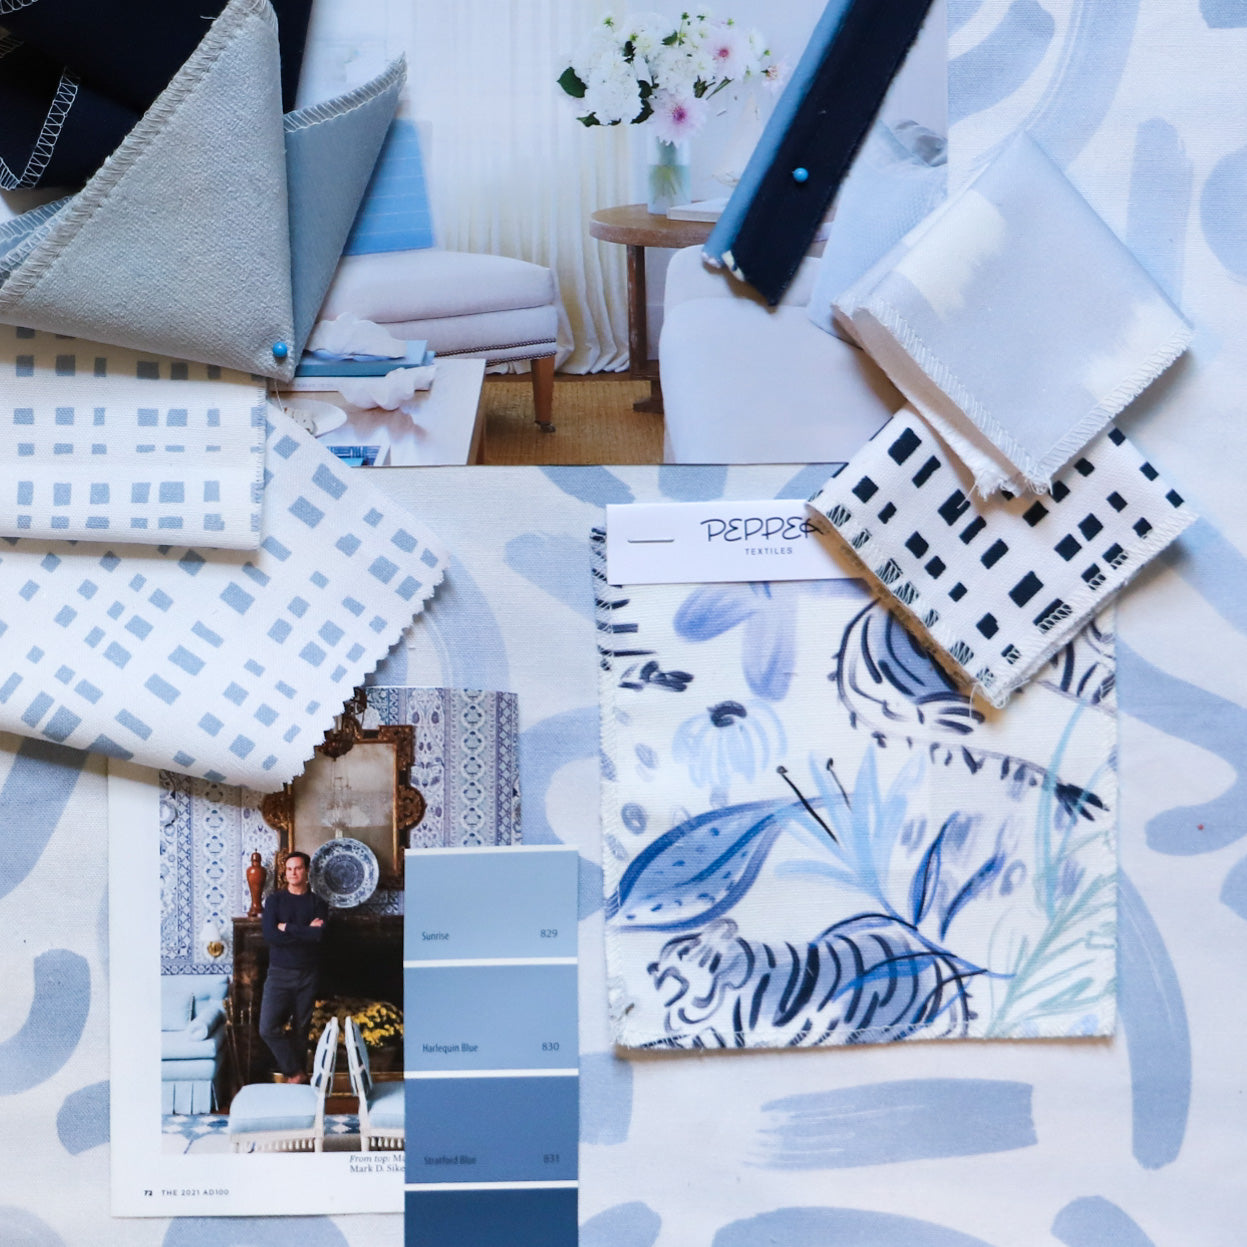 Interior design moodboard and fabric inspirations with Sky Blue Printed swatch, Sky Blue Gingham Printed Swatch, and Blue With Intricate Tiger Design Printed swatch